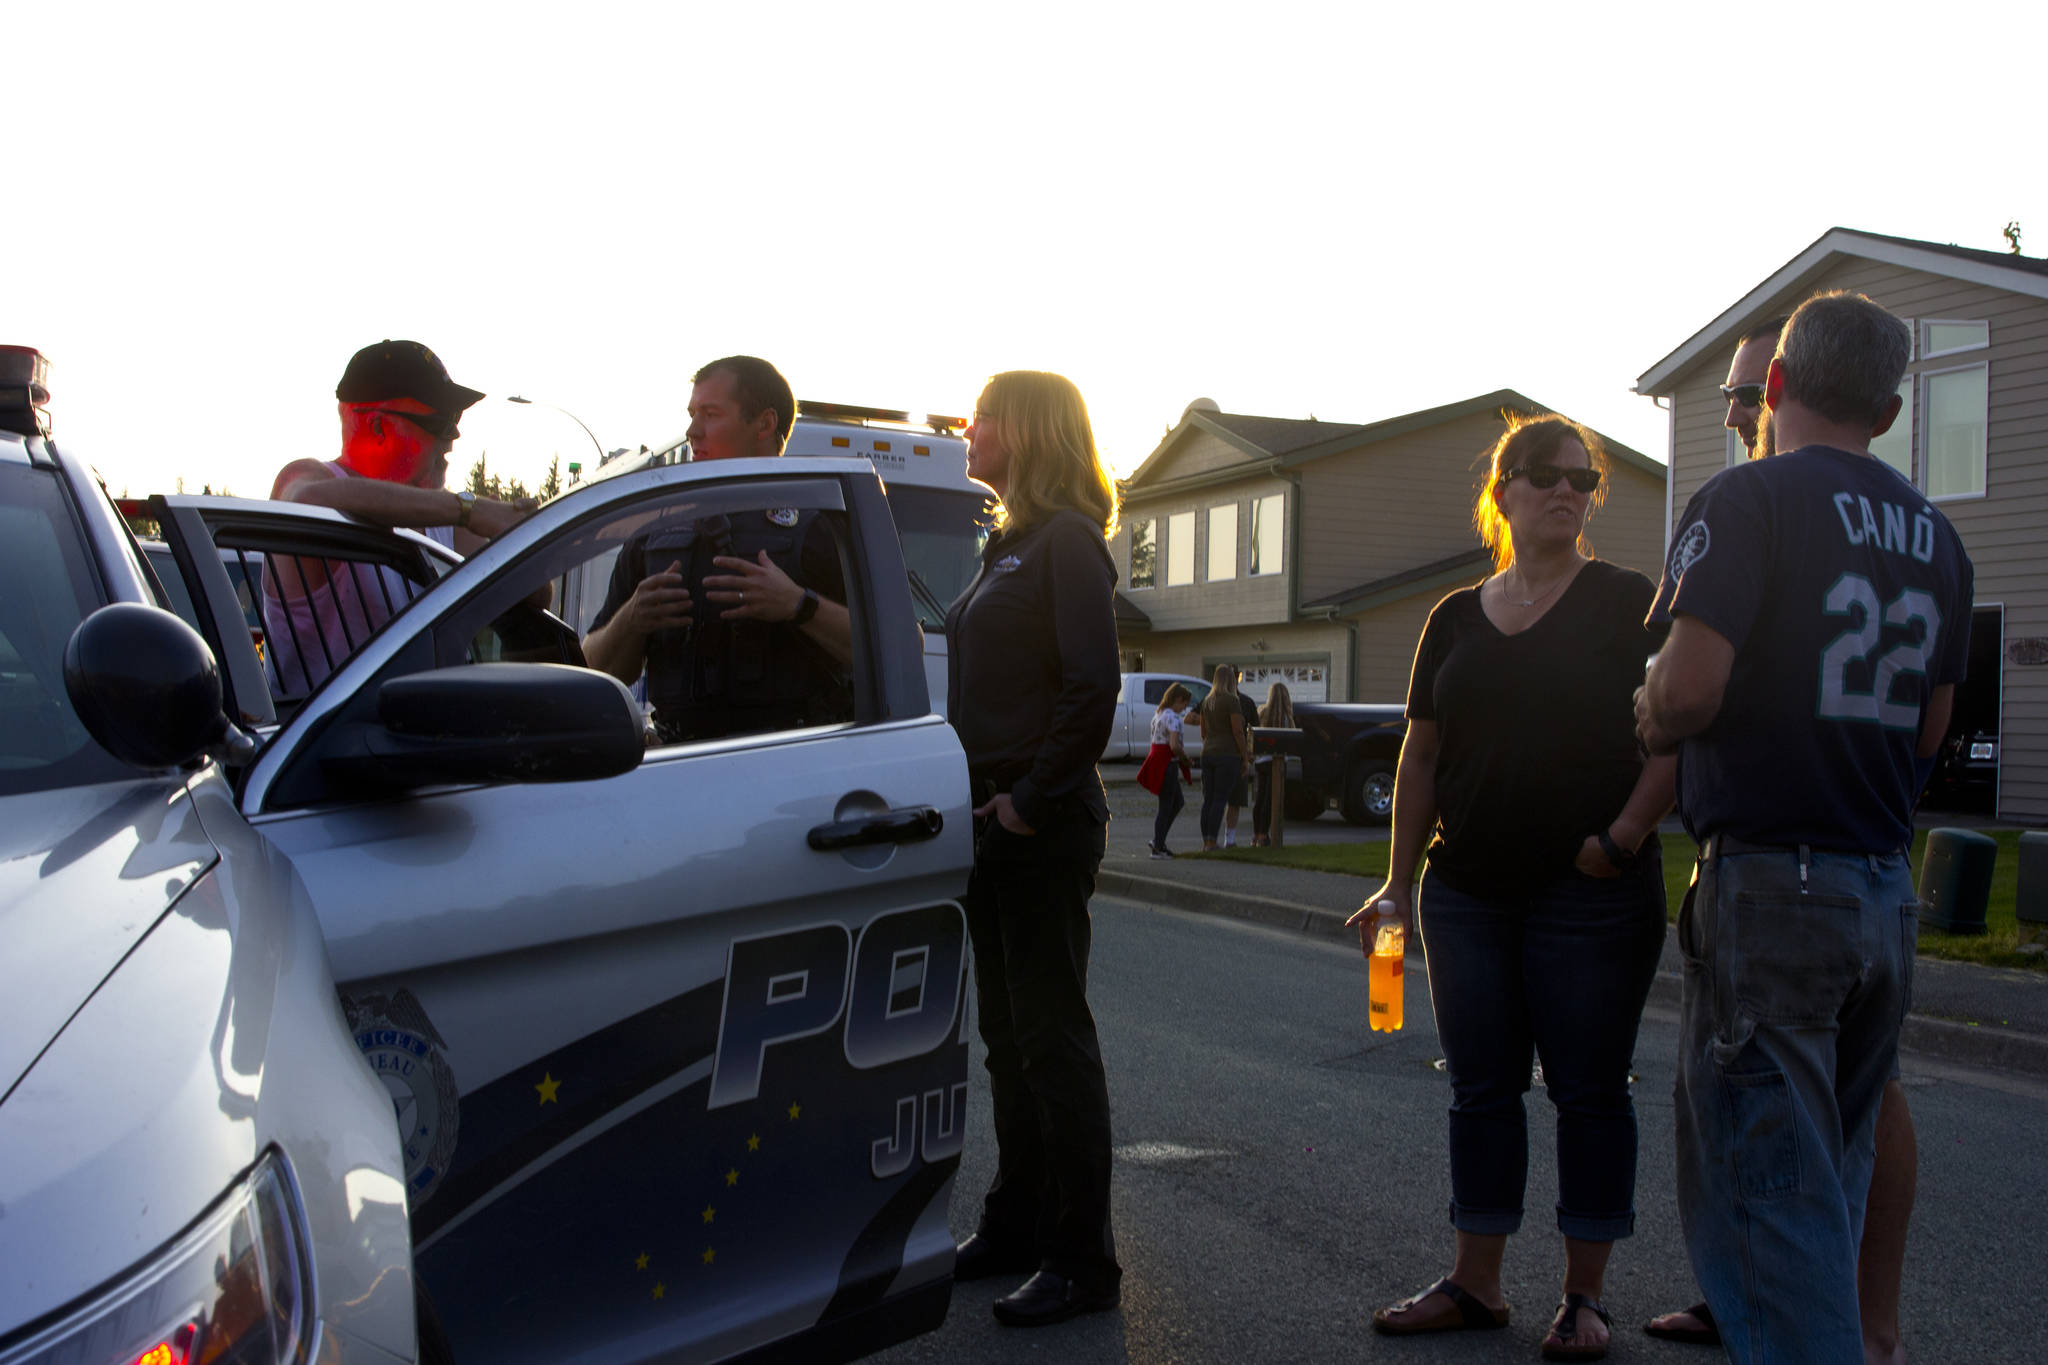 The Juneau Police Department organized participation in the National Night Out for all Juneau public services, including Capital City Fire/Rescue, the Alaska State Troopers, and other uniformed and nonuniformed public services, Aug. 6, 2019. (Michael S. Lockett | Juneau Empire)